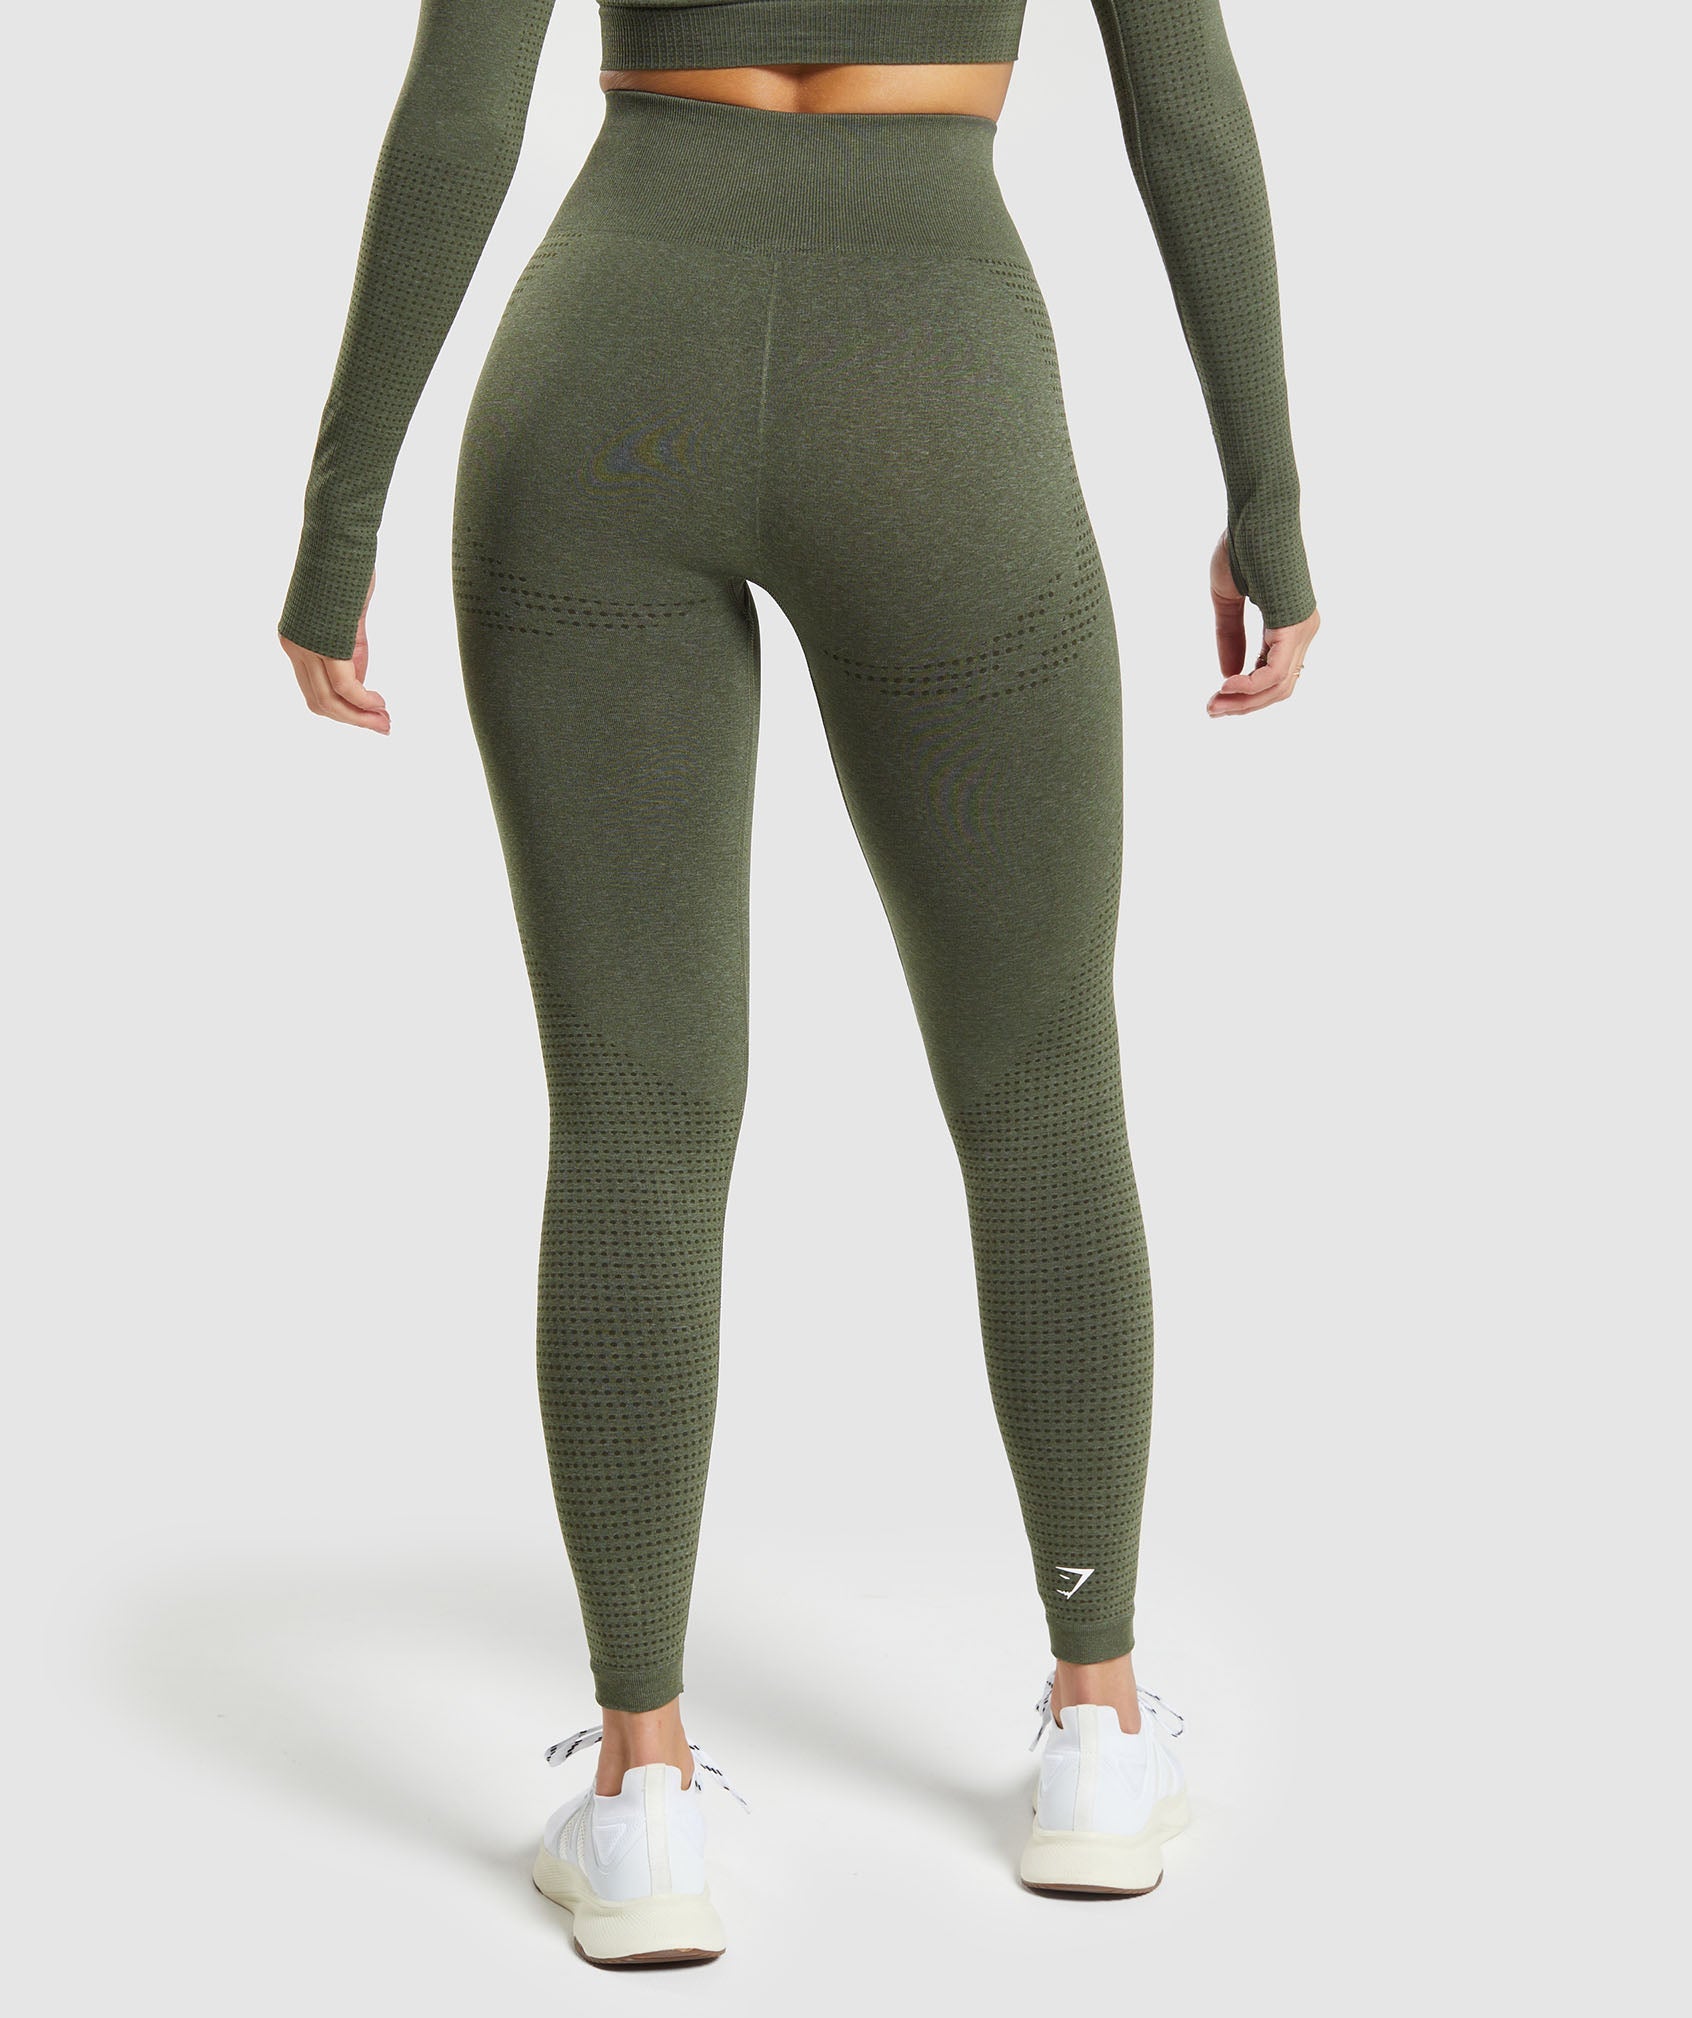 Buy ICANIWILL Stride Tights Wmn - Green